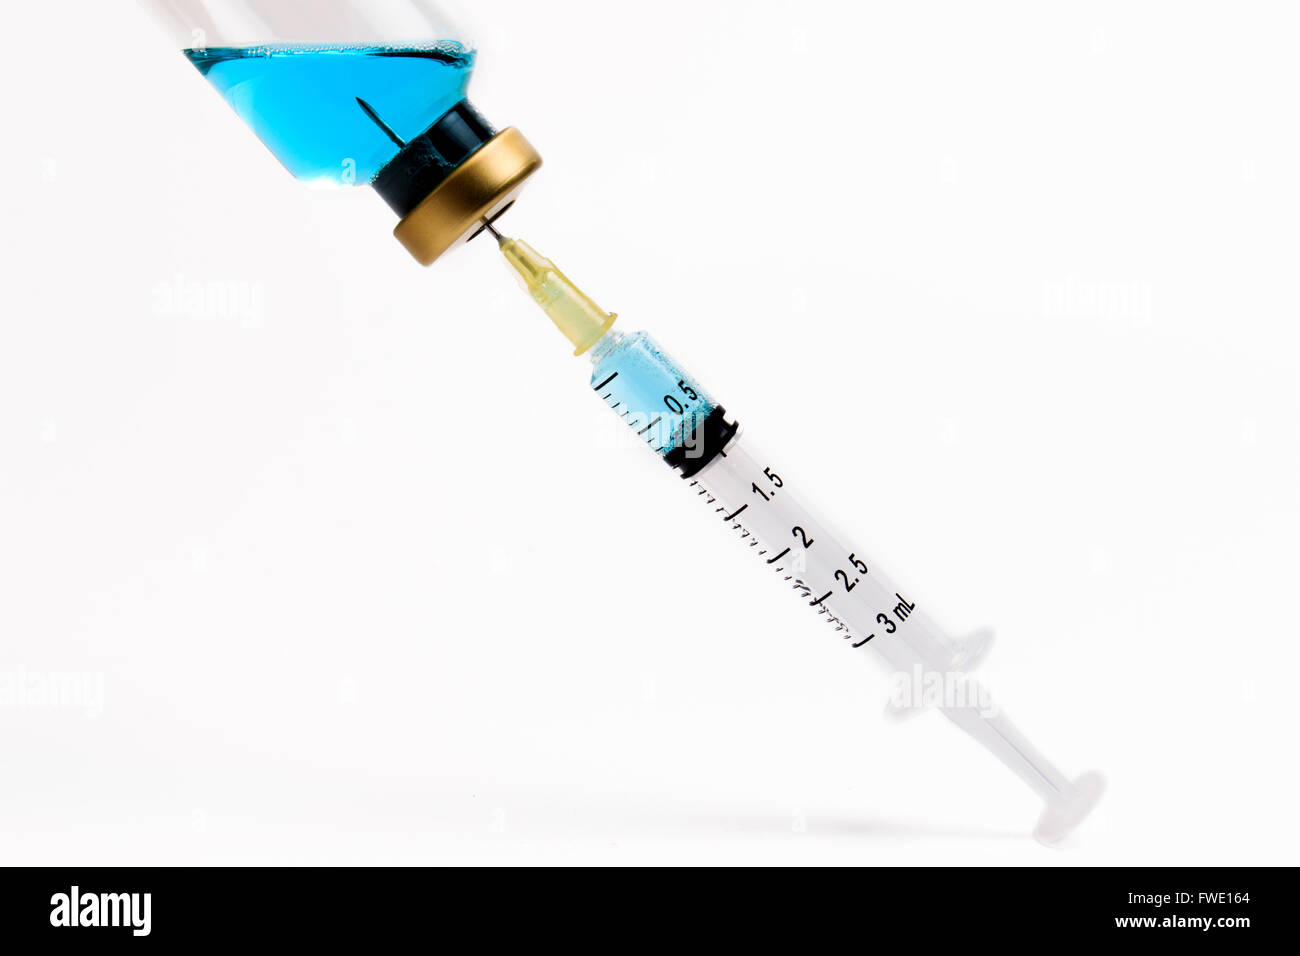 Prepare for injection. Ready to put a vaccine. Stock Photo